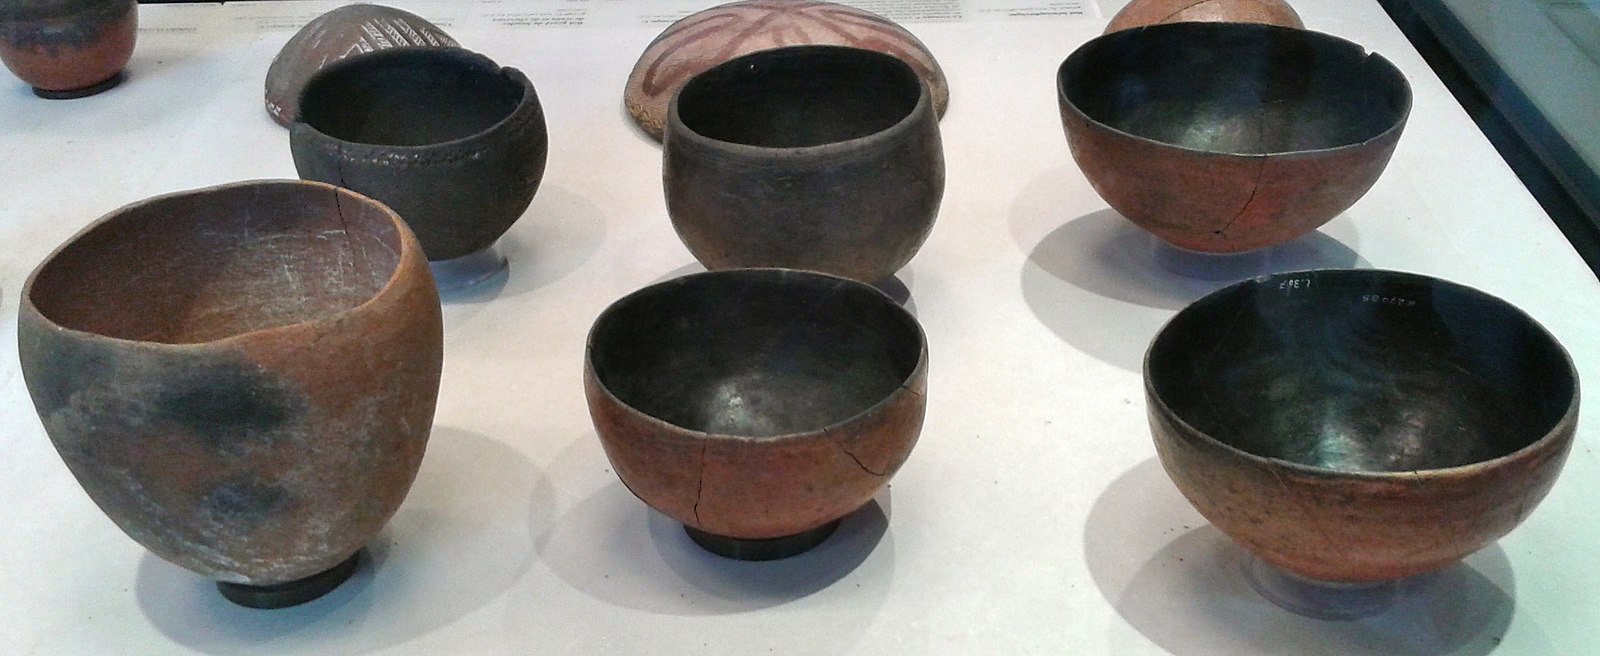 Nubian pottery bowls in different circular sizes mostly in brown and black.